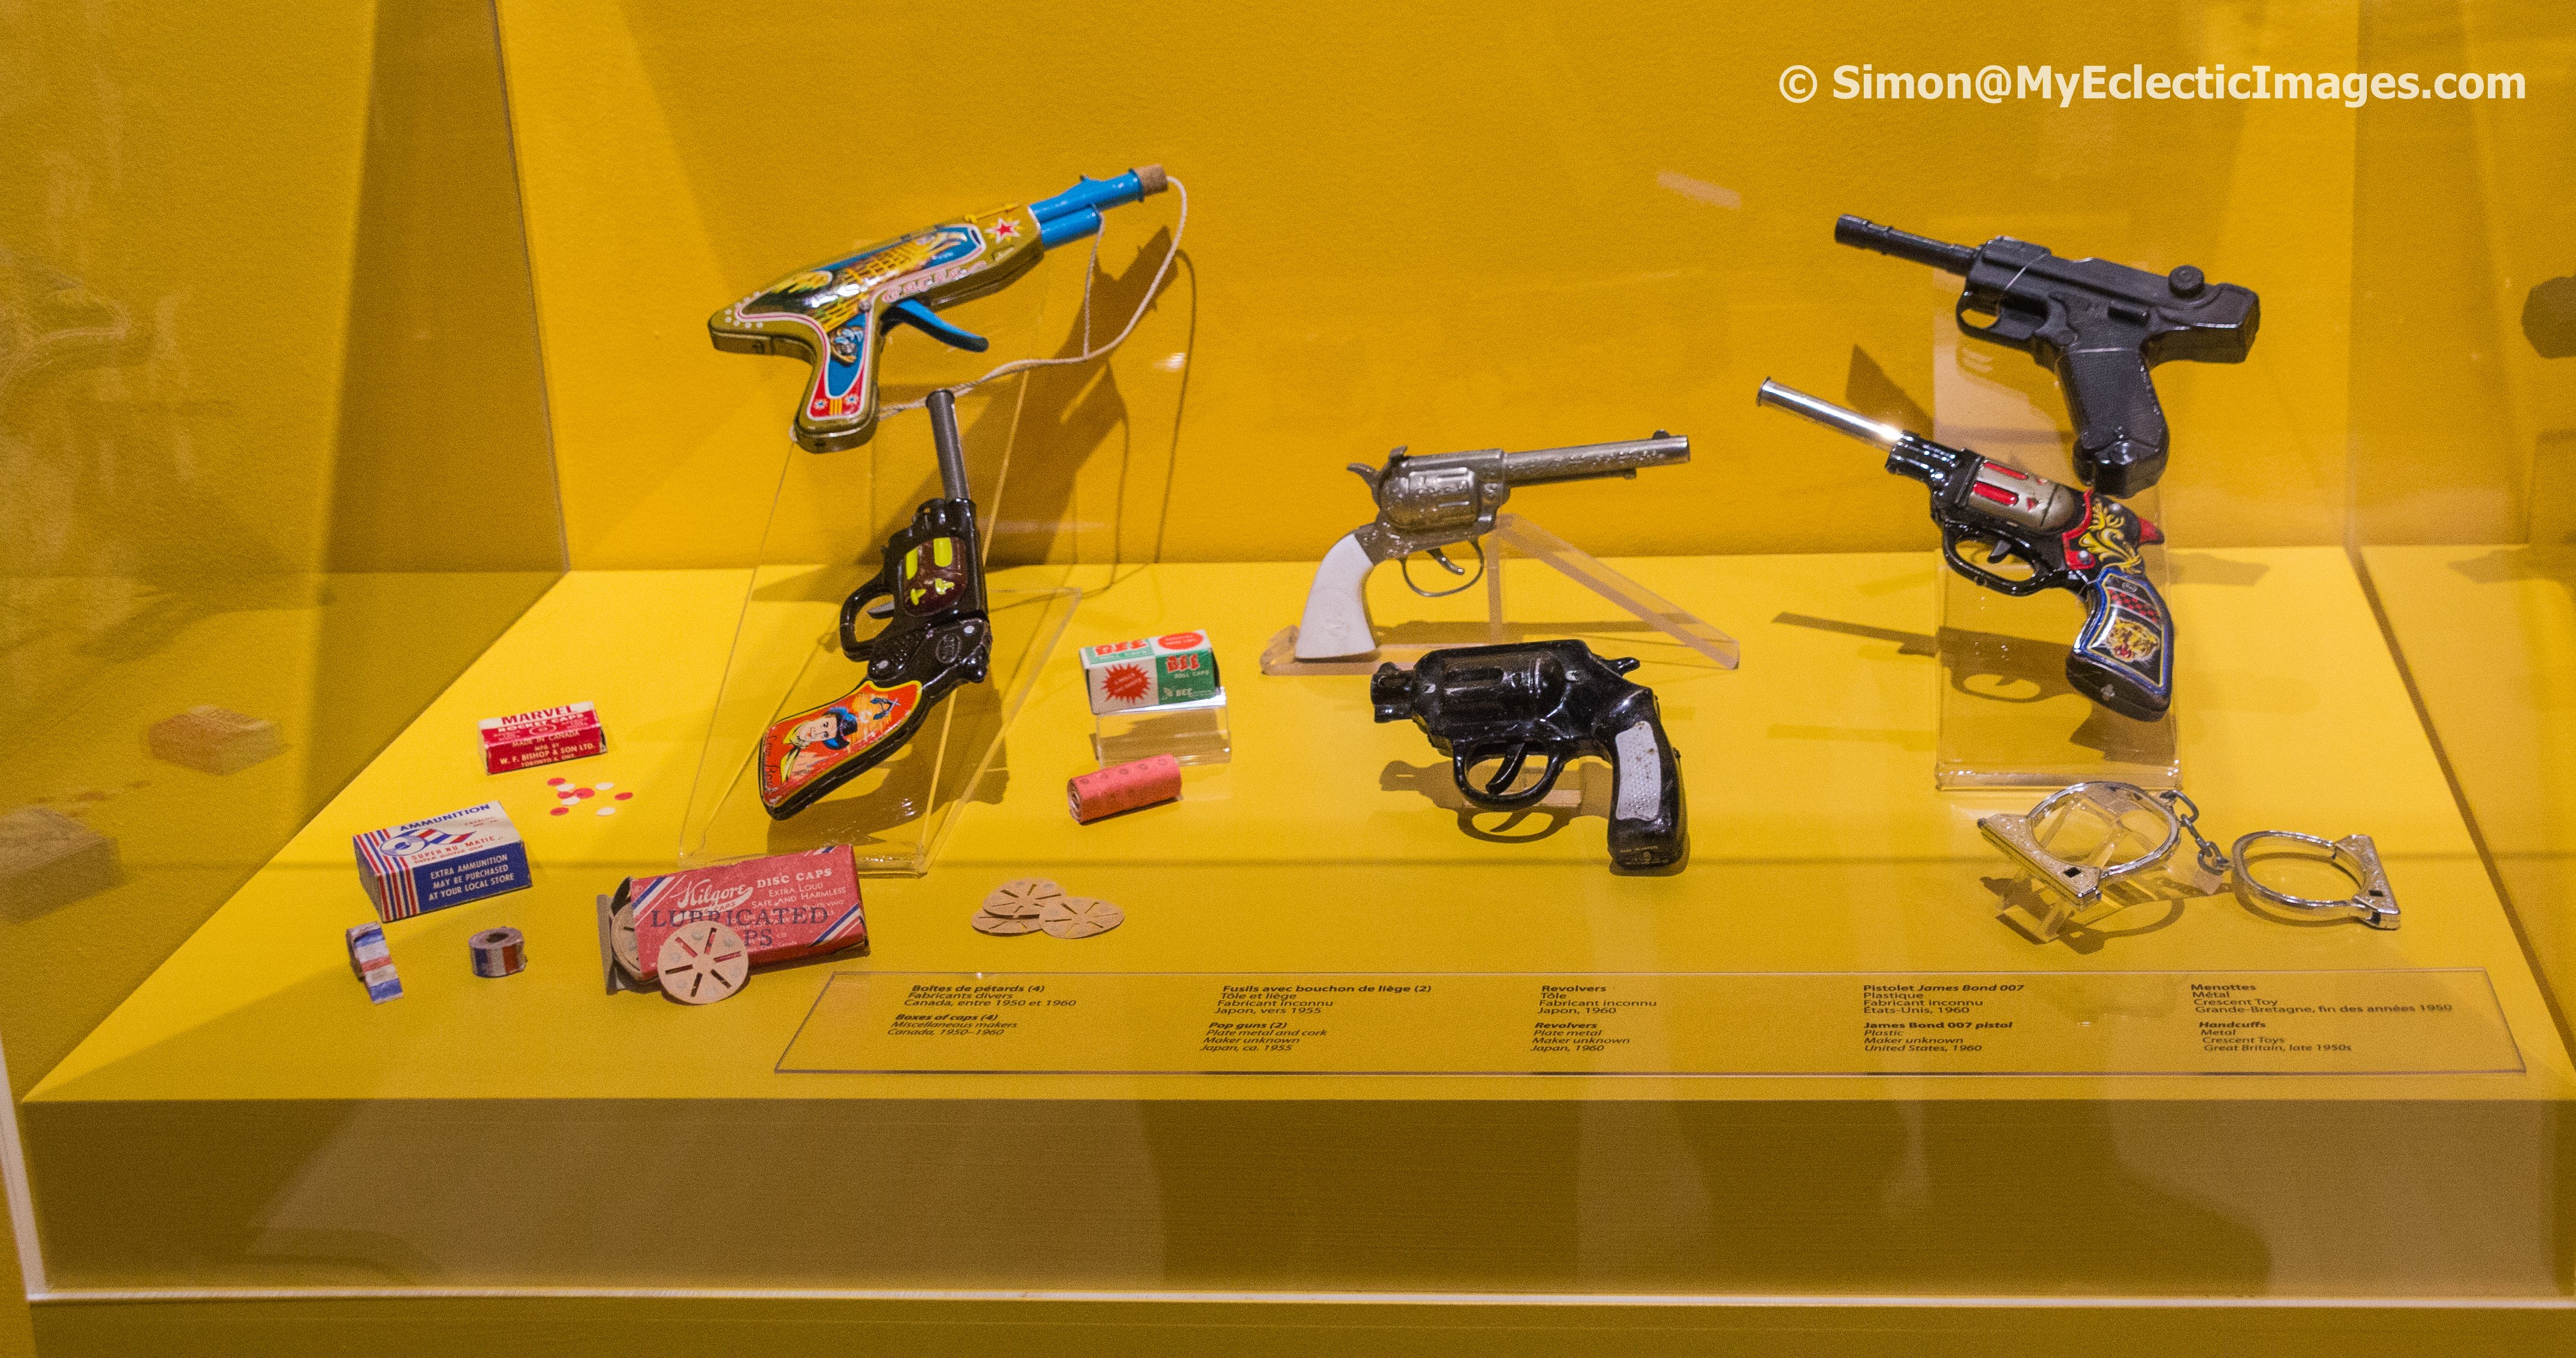 A Display of Toy Guns Spanning More than 50 Years Quebec Museum of Folk Culture